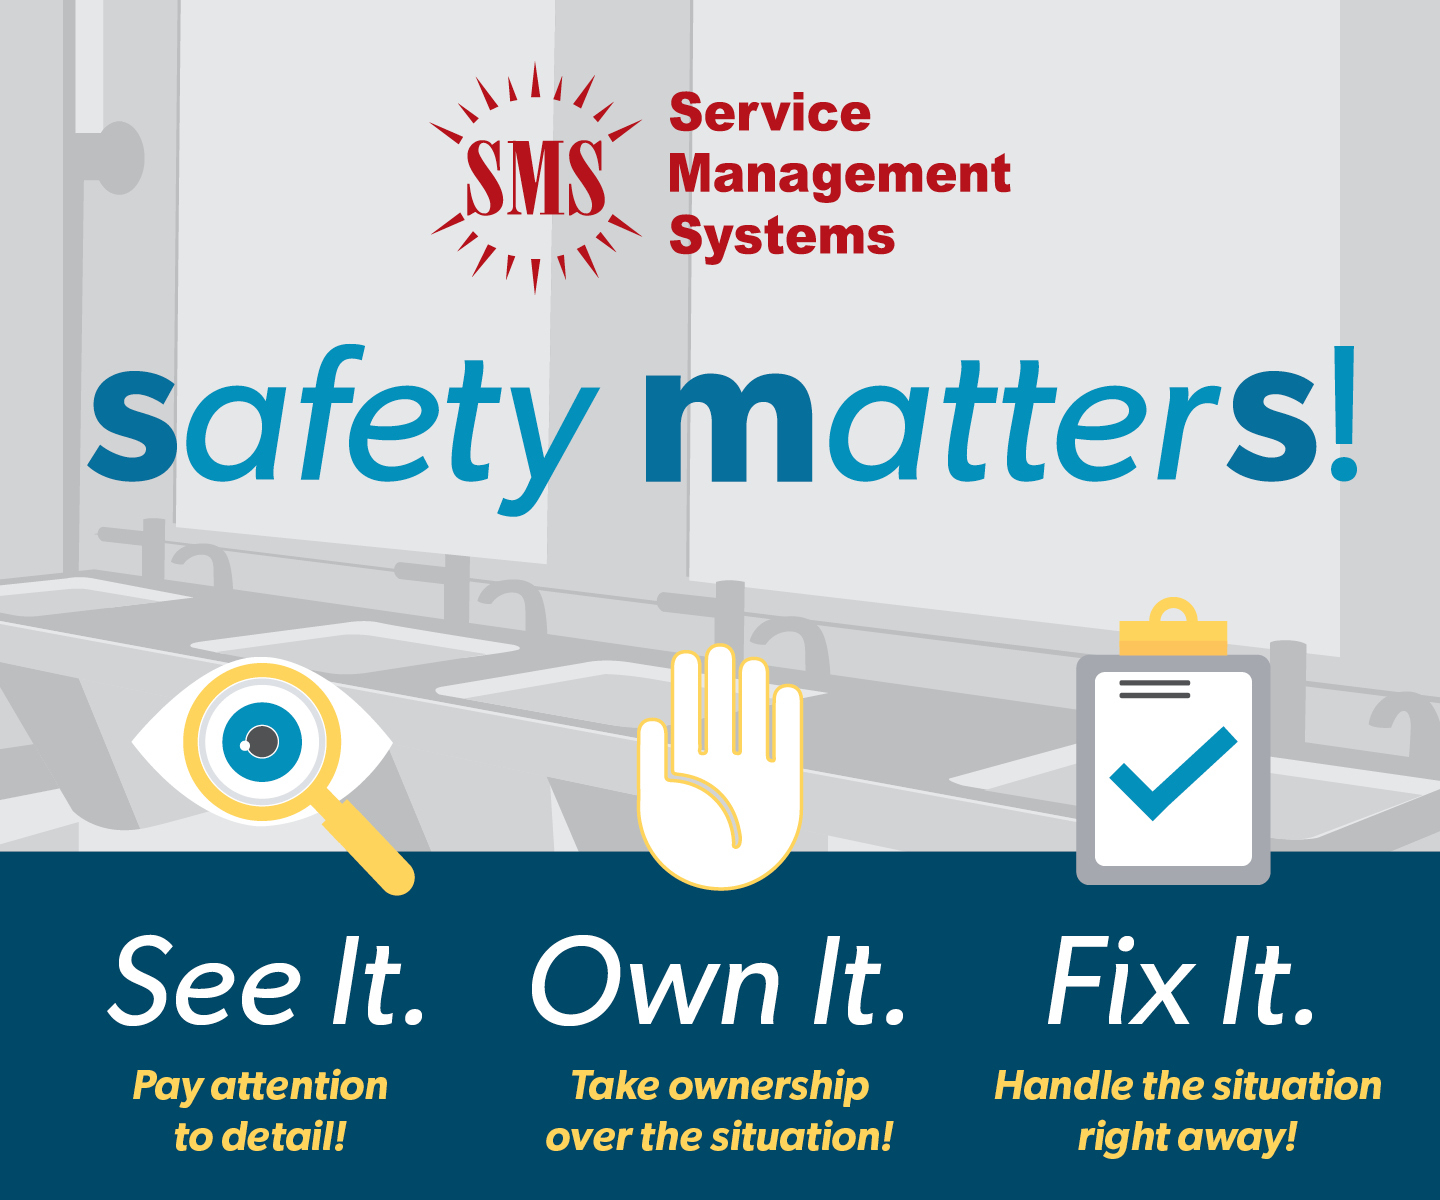 SMS Safety Matters! See It. Own It. Fix It.